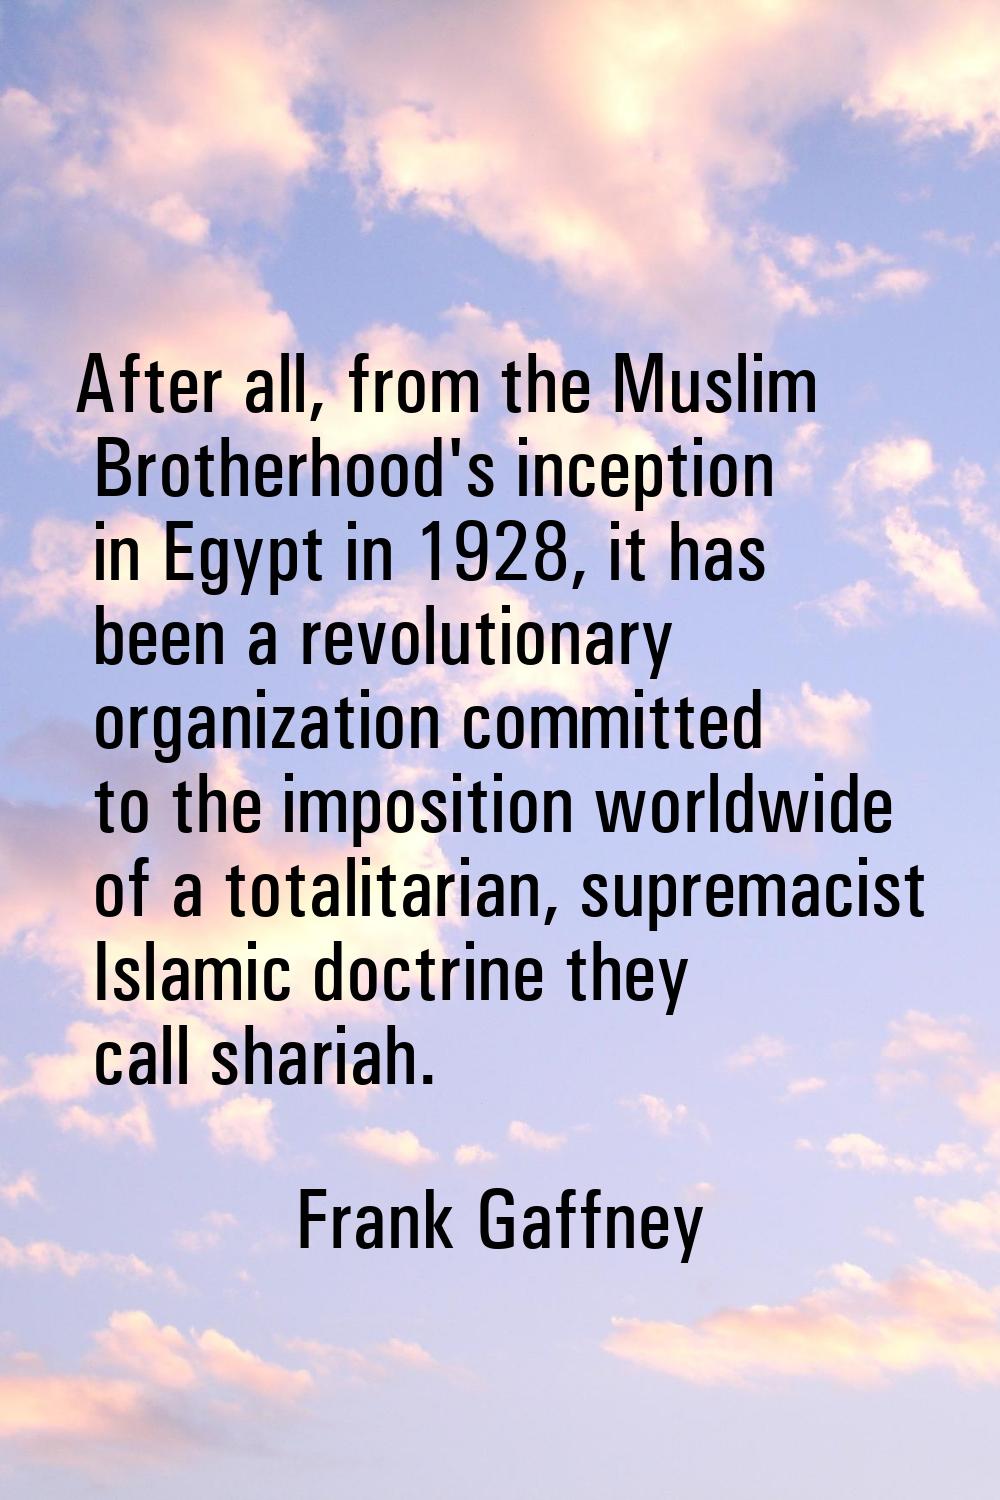 After all, from the Muslim Brotherhood's inception in Egypt in 1928, it has been a revolutionary or